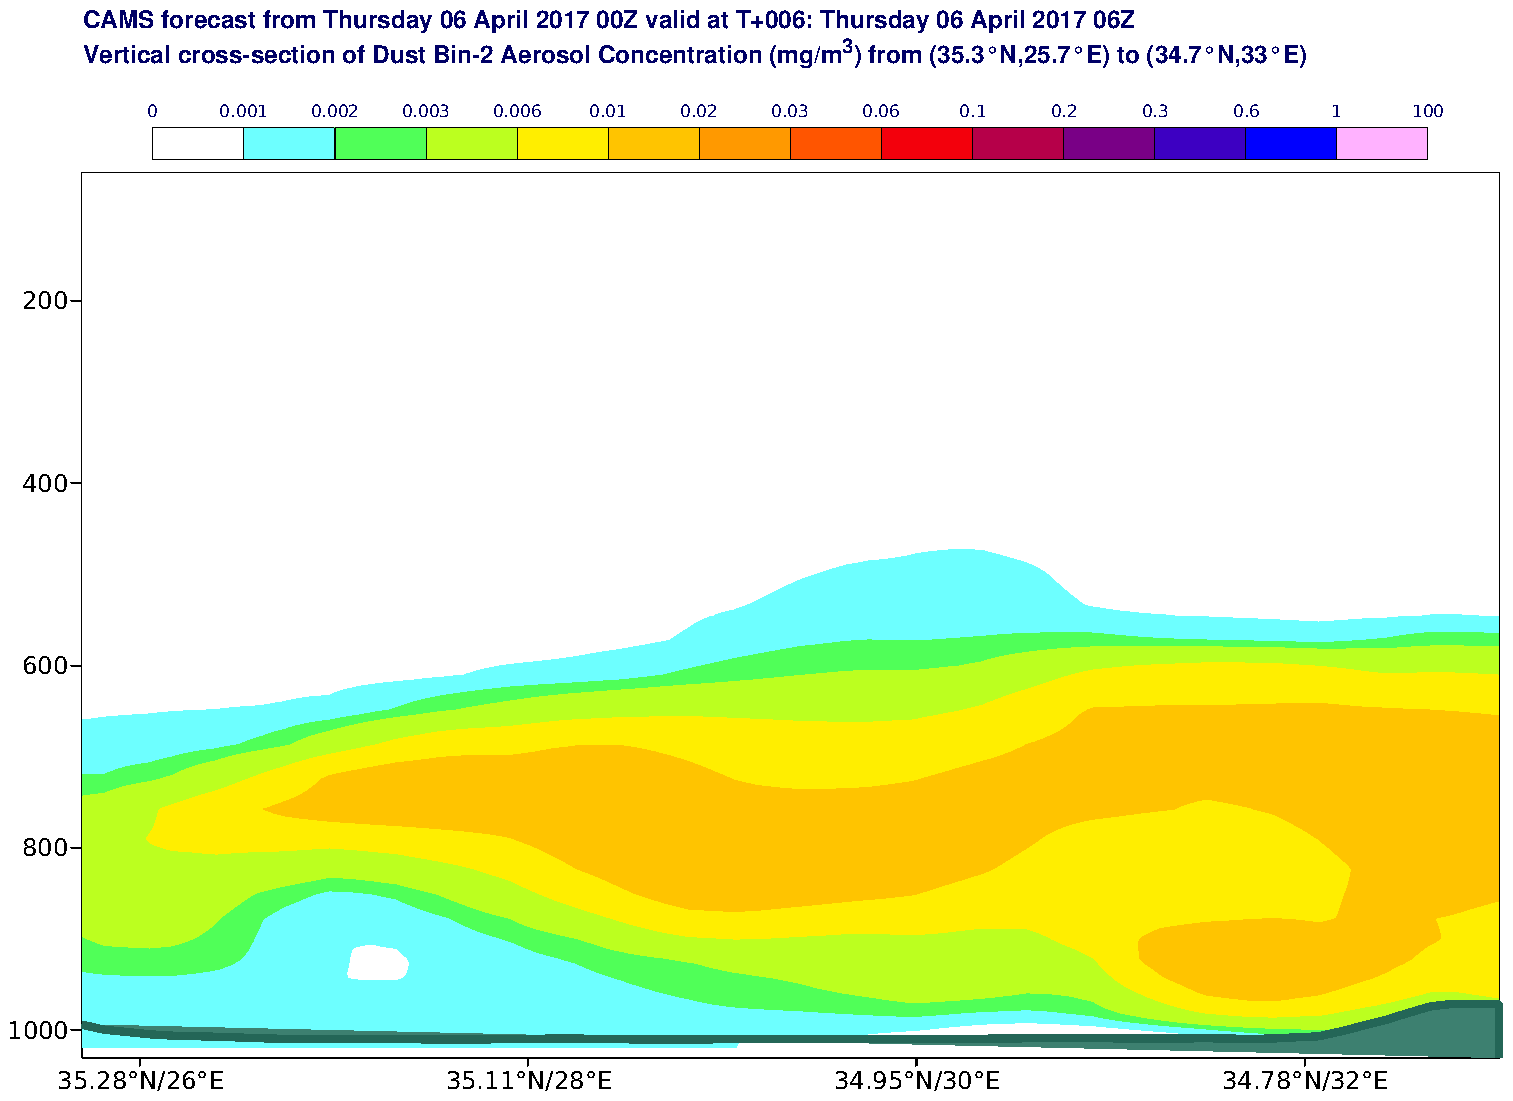 Vertical cross-section of Dust Bin-2 Aerosol Concentration (mg/m3) valid at T6 - 2017-04-06 06:00